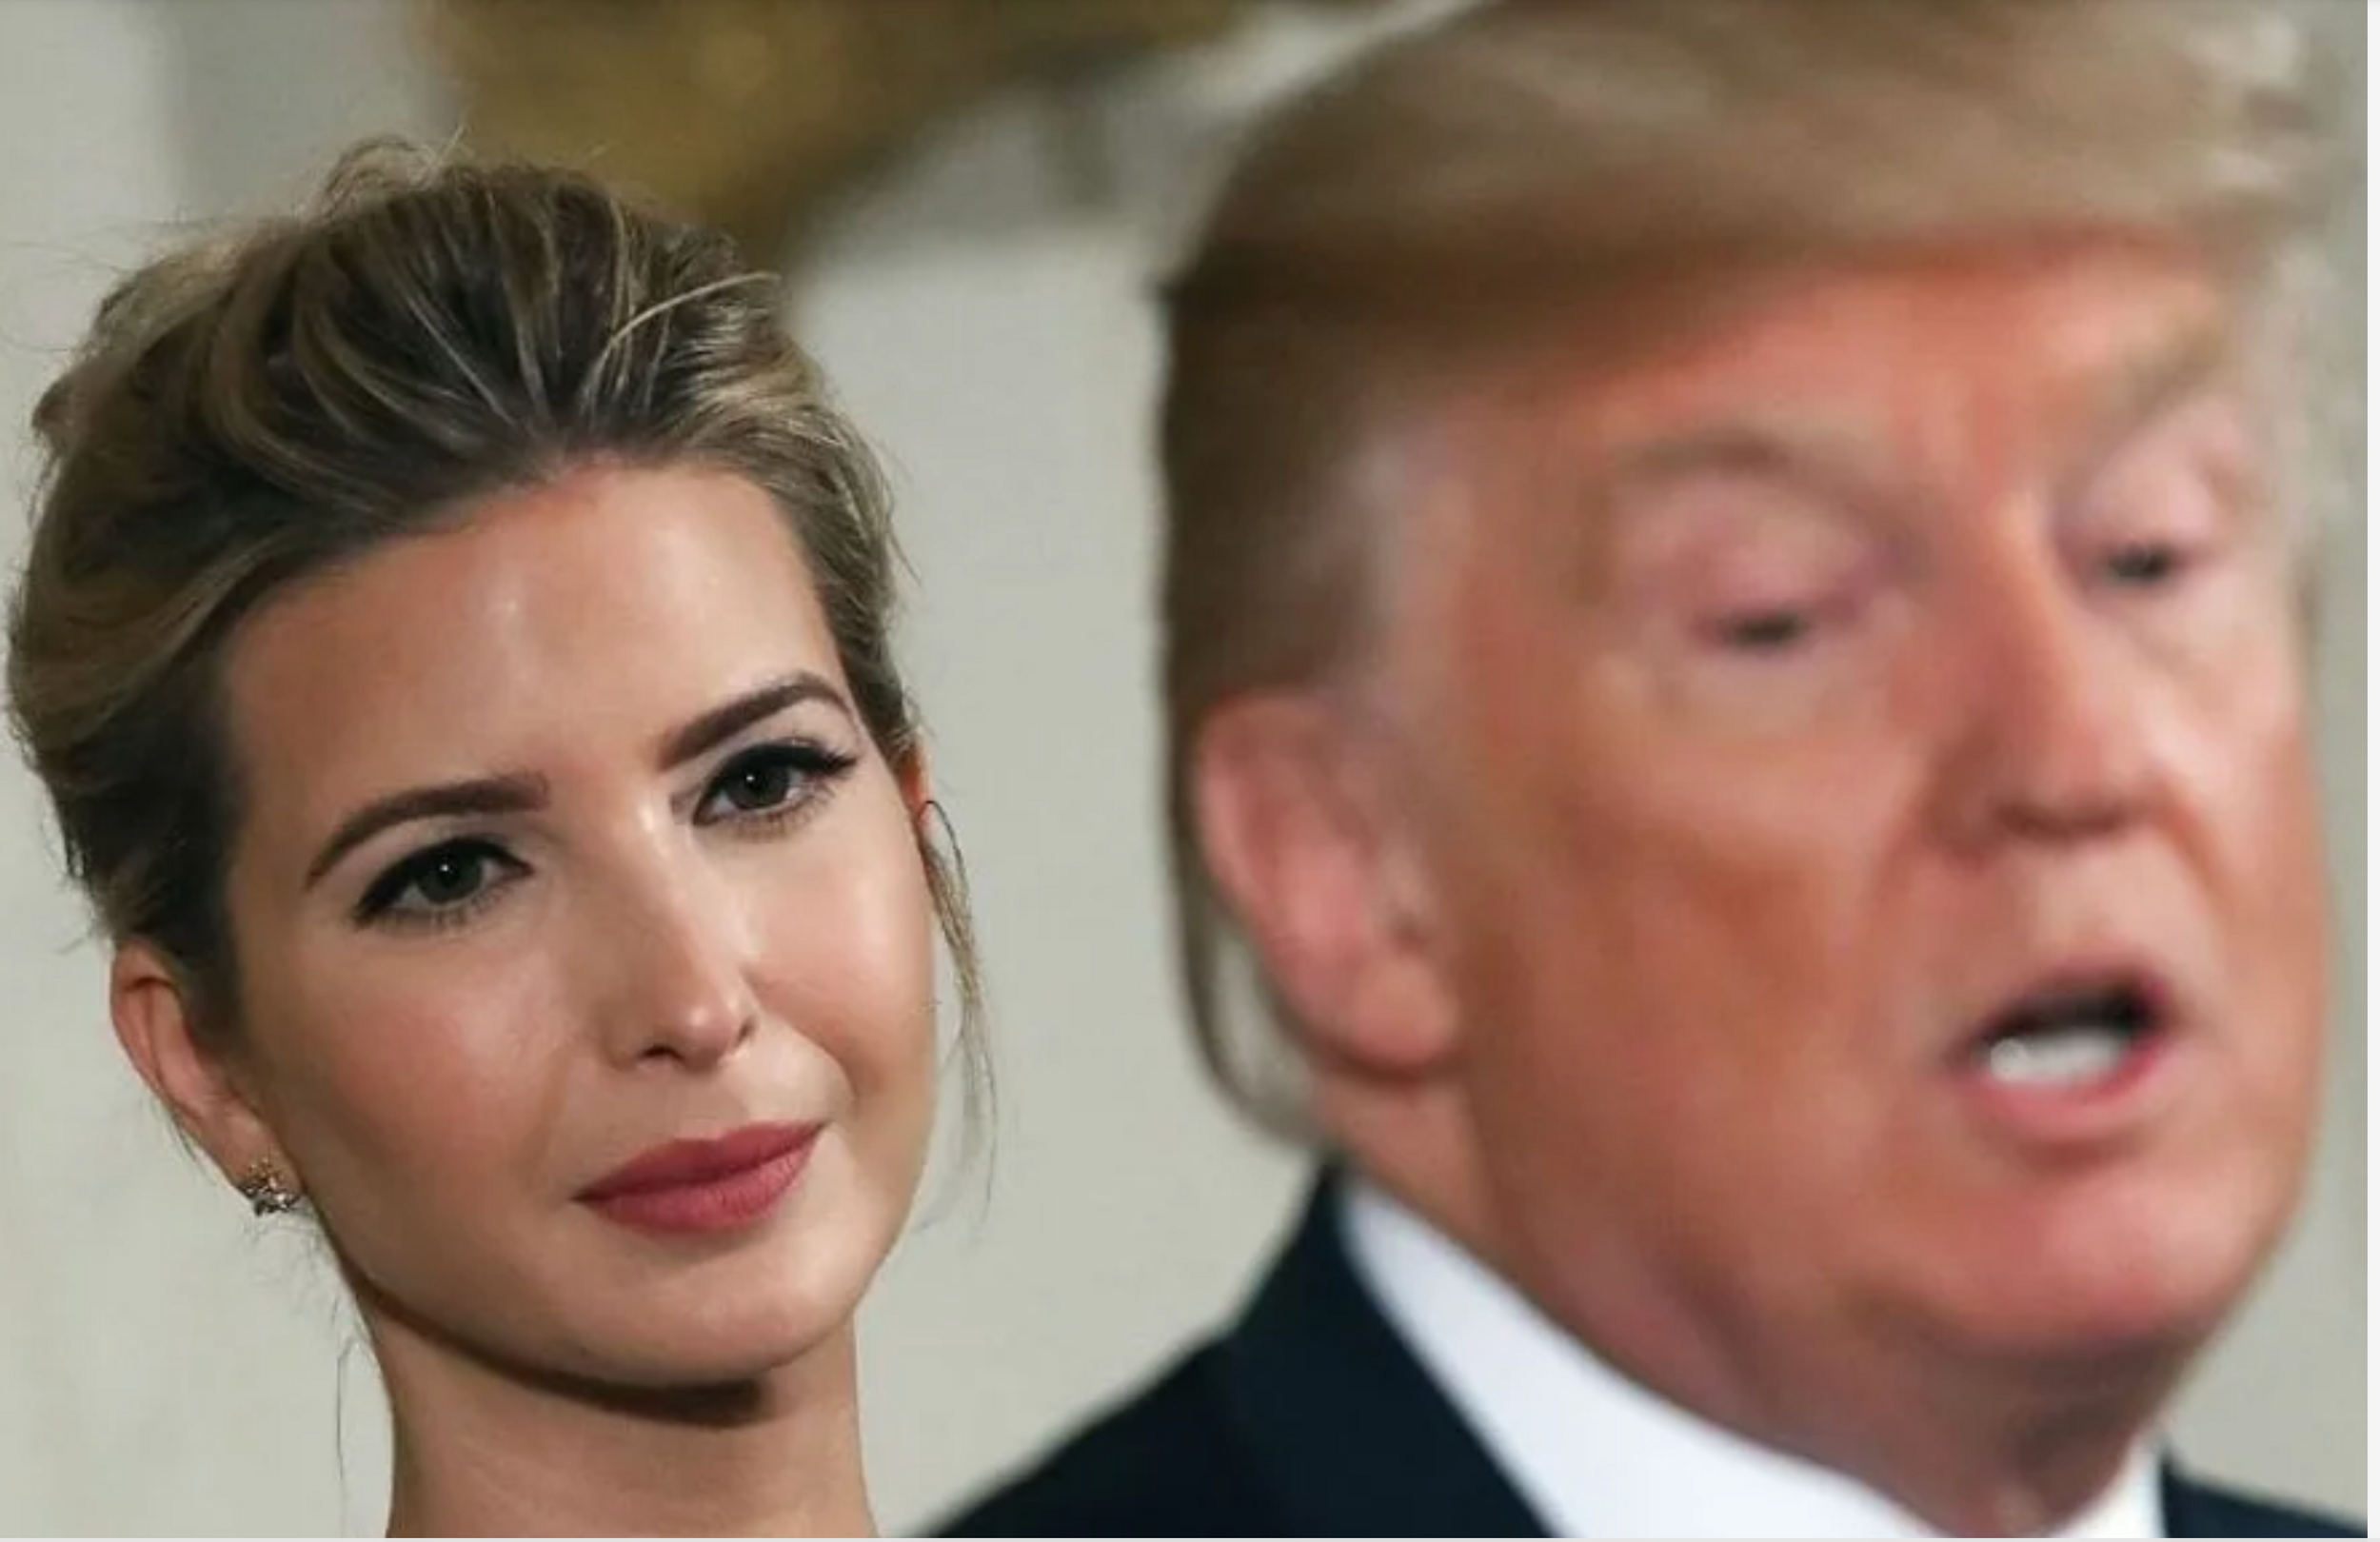 Trump Slams Jan 6 Committee for Going 'After Children' With Ivanka Inquiry—and Everyone Had the Same Response